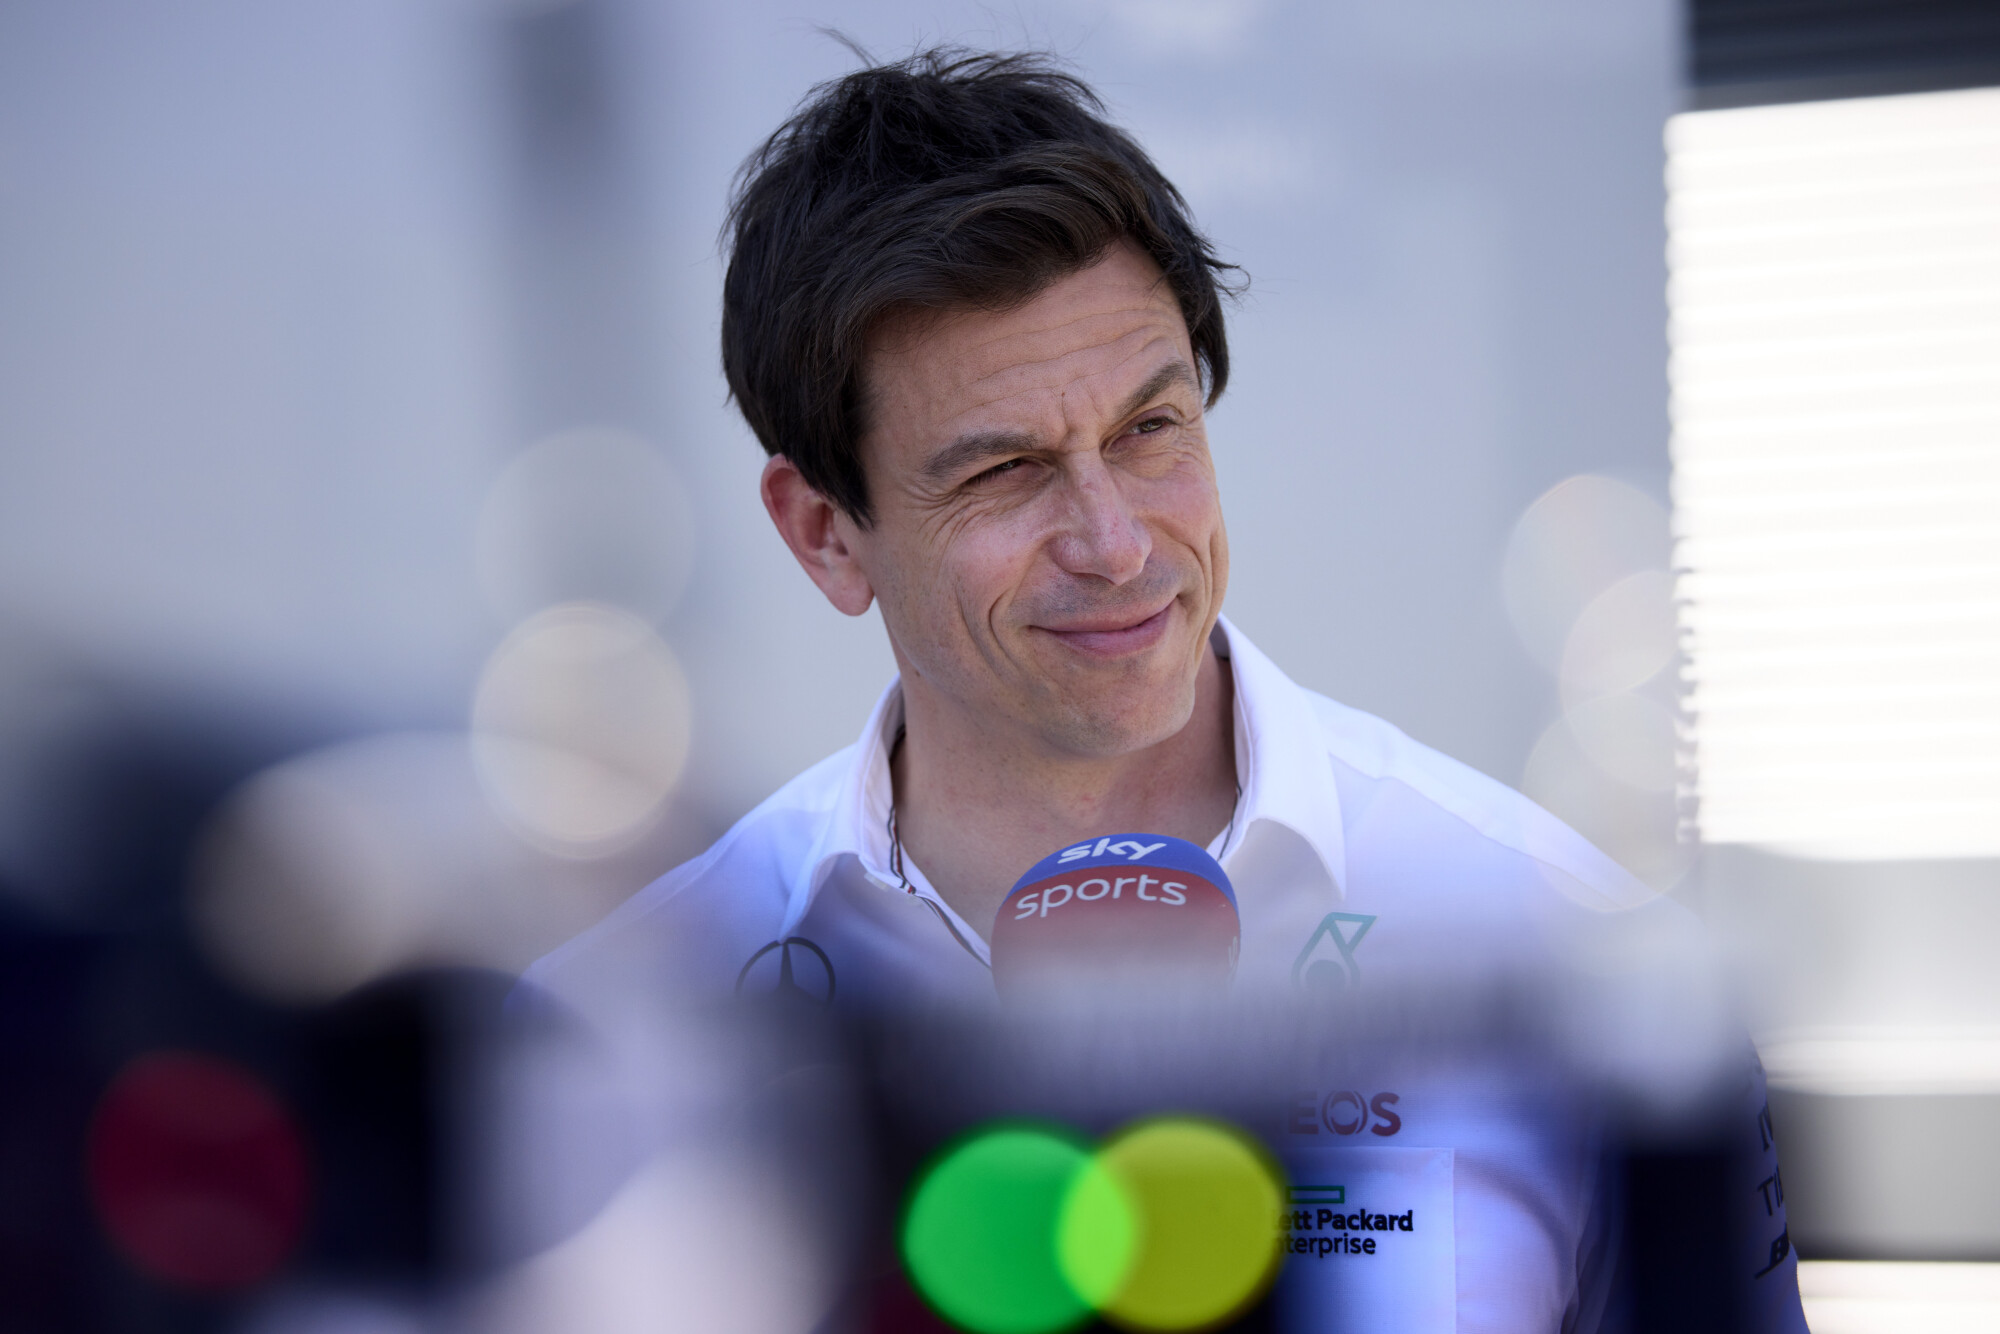 Toto Wolff tegenover sky